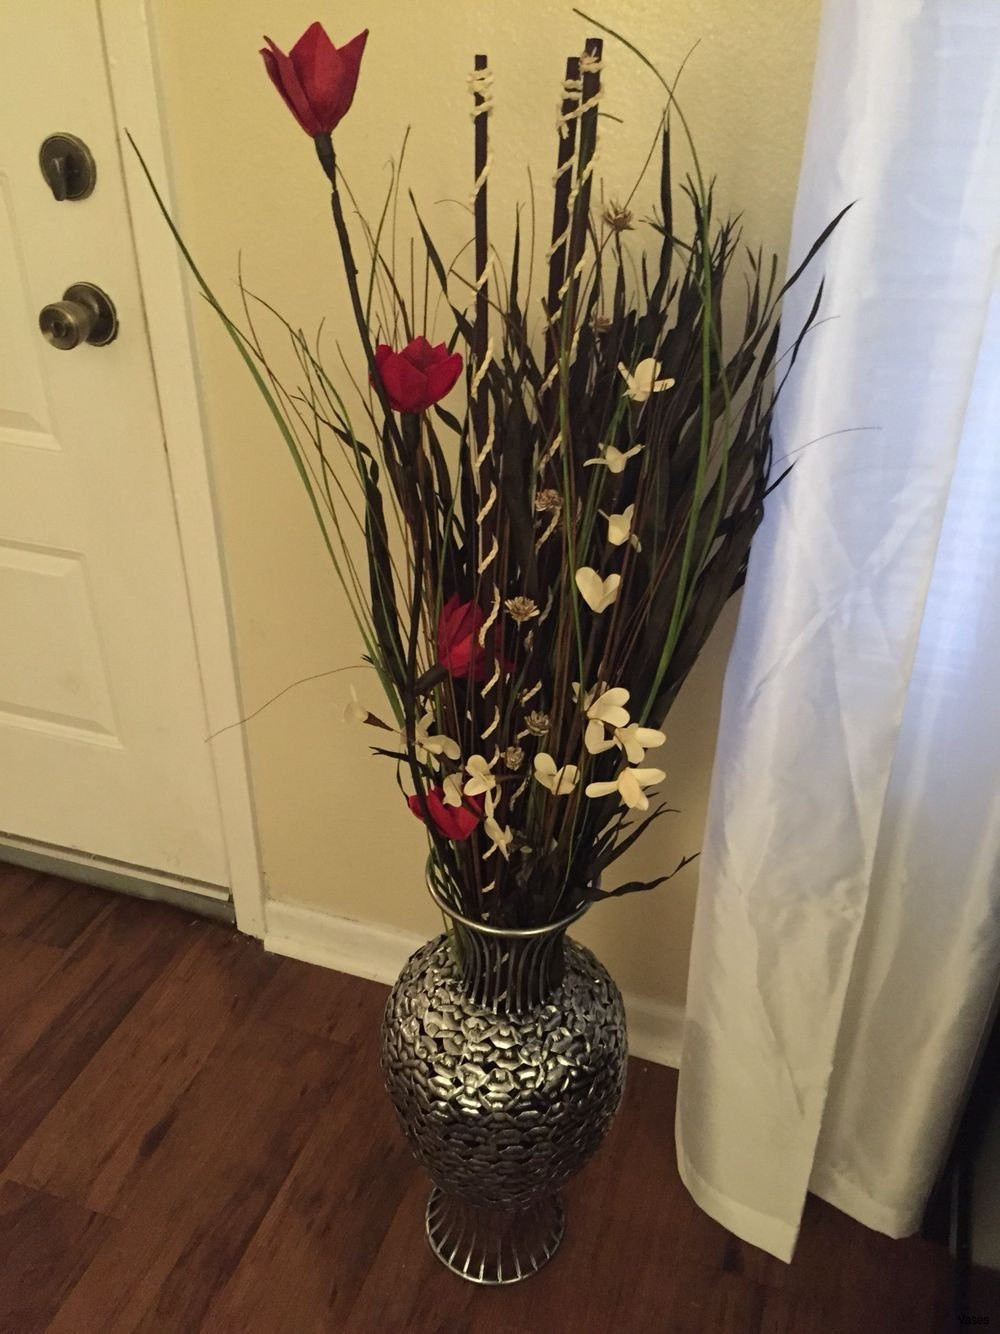 25 attractive Bamboo Vase Decoration 2024 free download bamboo vase decoration of vase with sticks stock bamboo sticks home decor fresh vases vase with bamboo sticks home decor fresh vases vase with sticks red in a i 0d